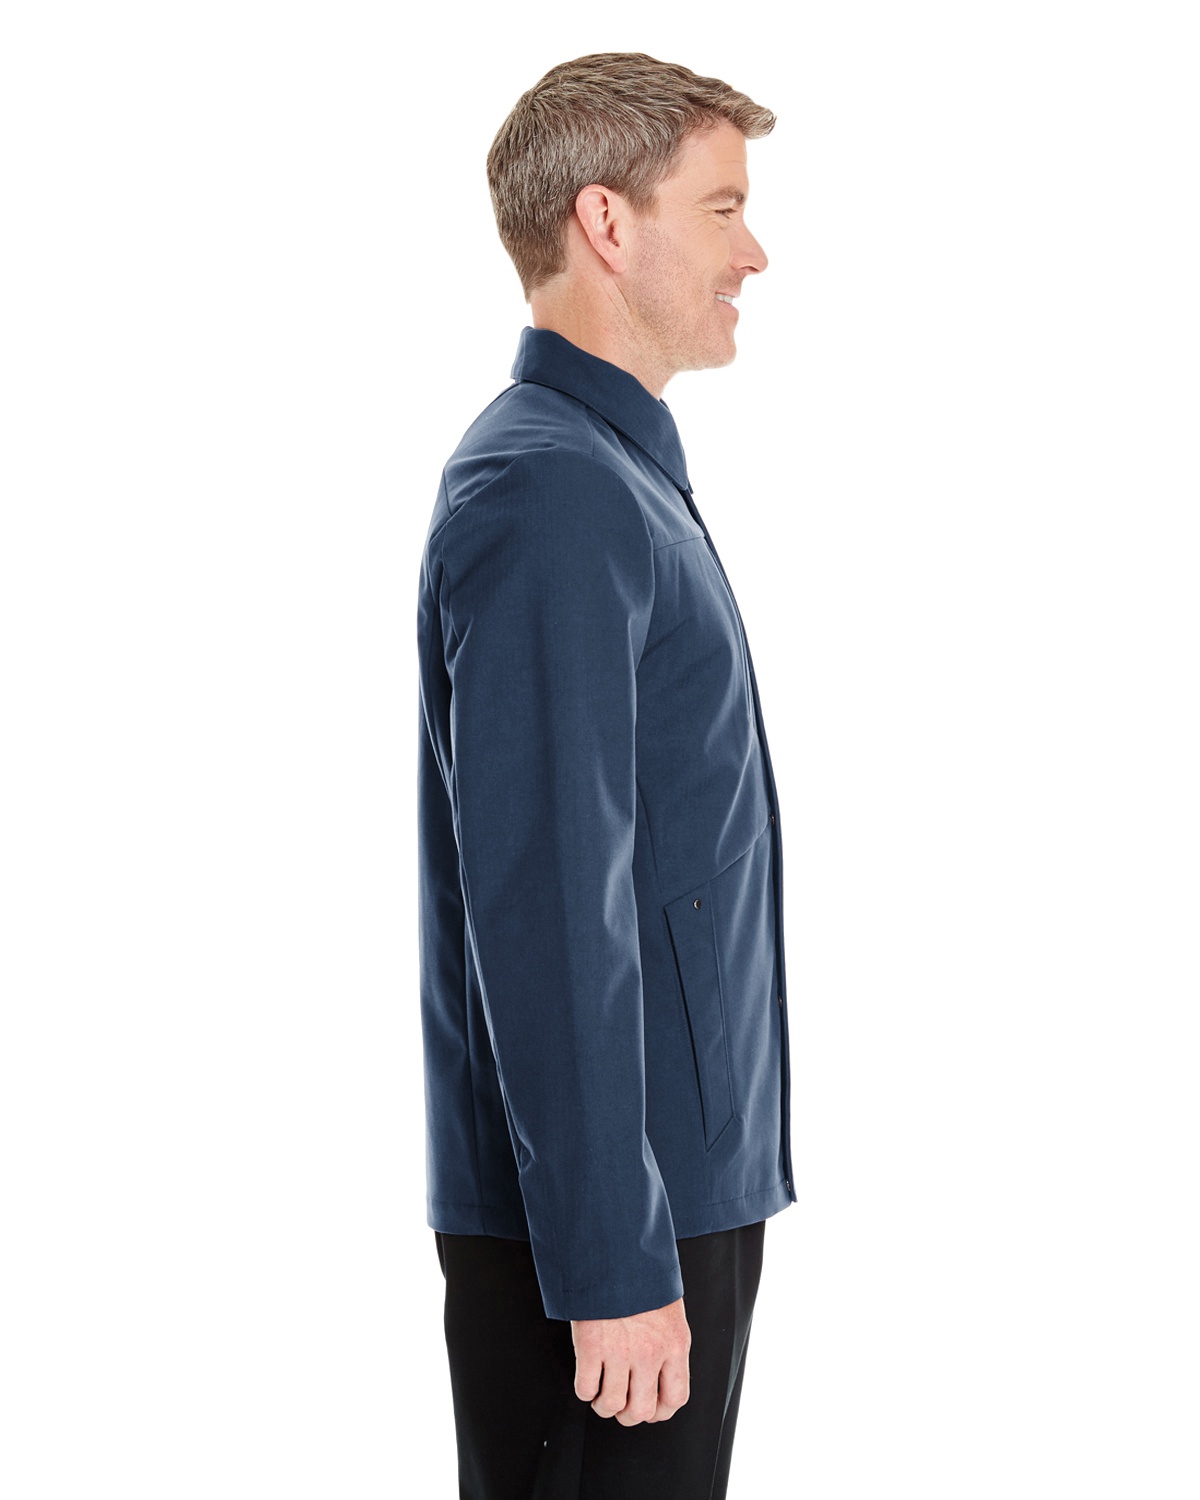 'Ash City - North End NE705 Men's Edge Soft Shell Jacket with Fold-Down Collar'